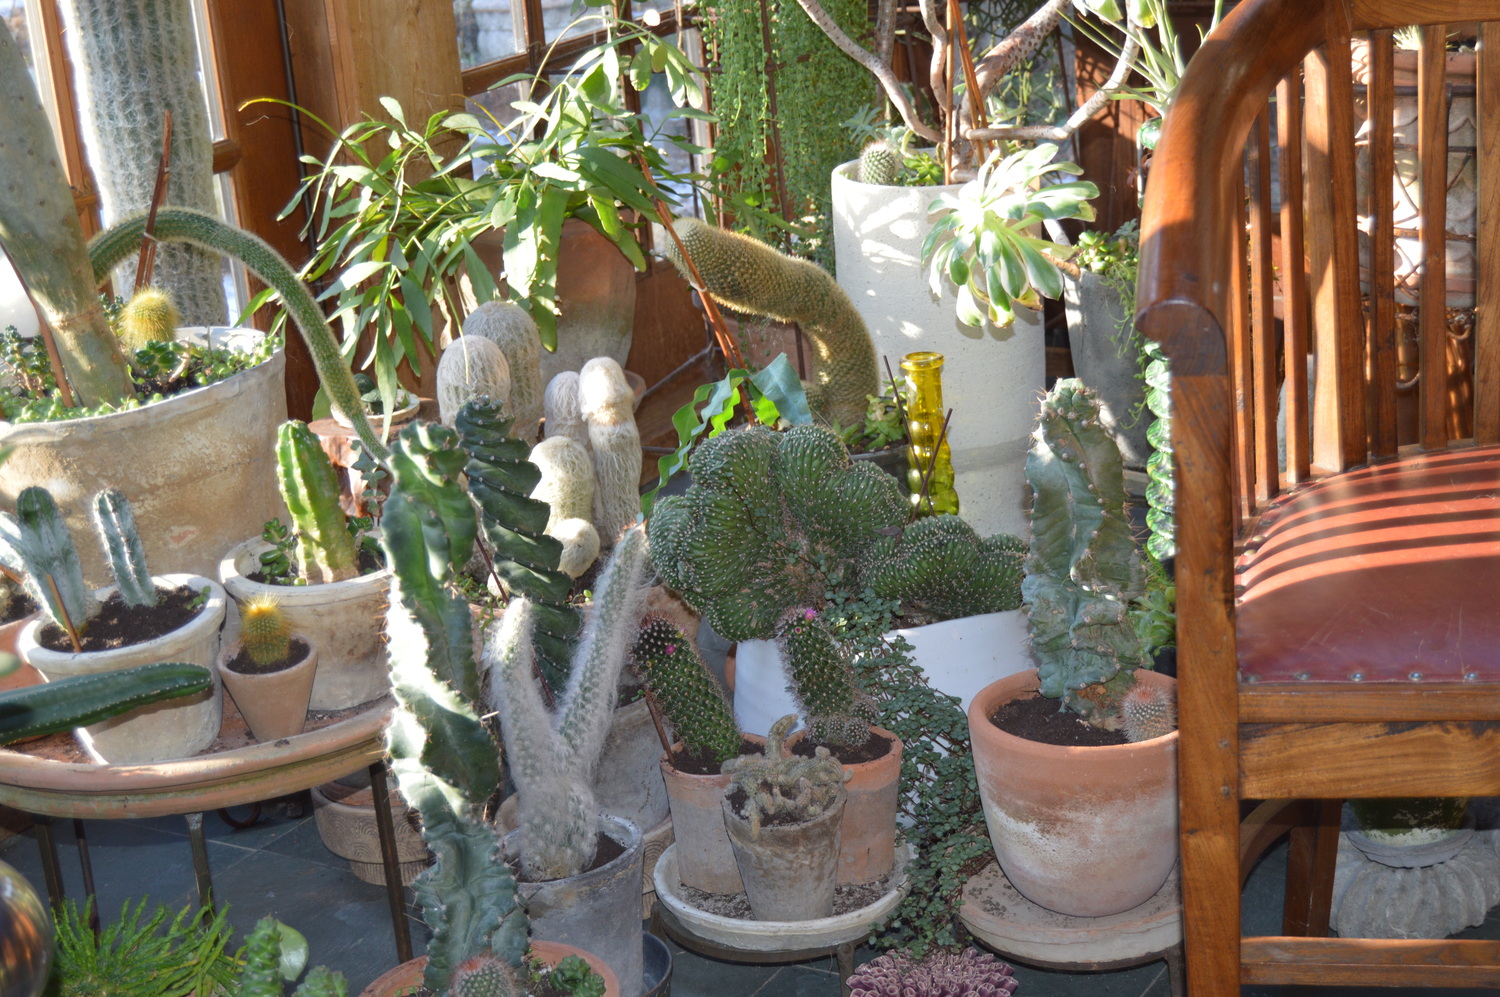 The succulents on display. TOM GOGOLA